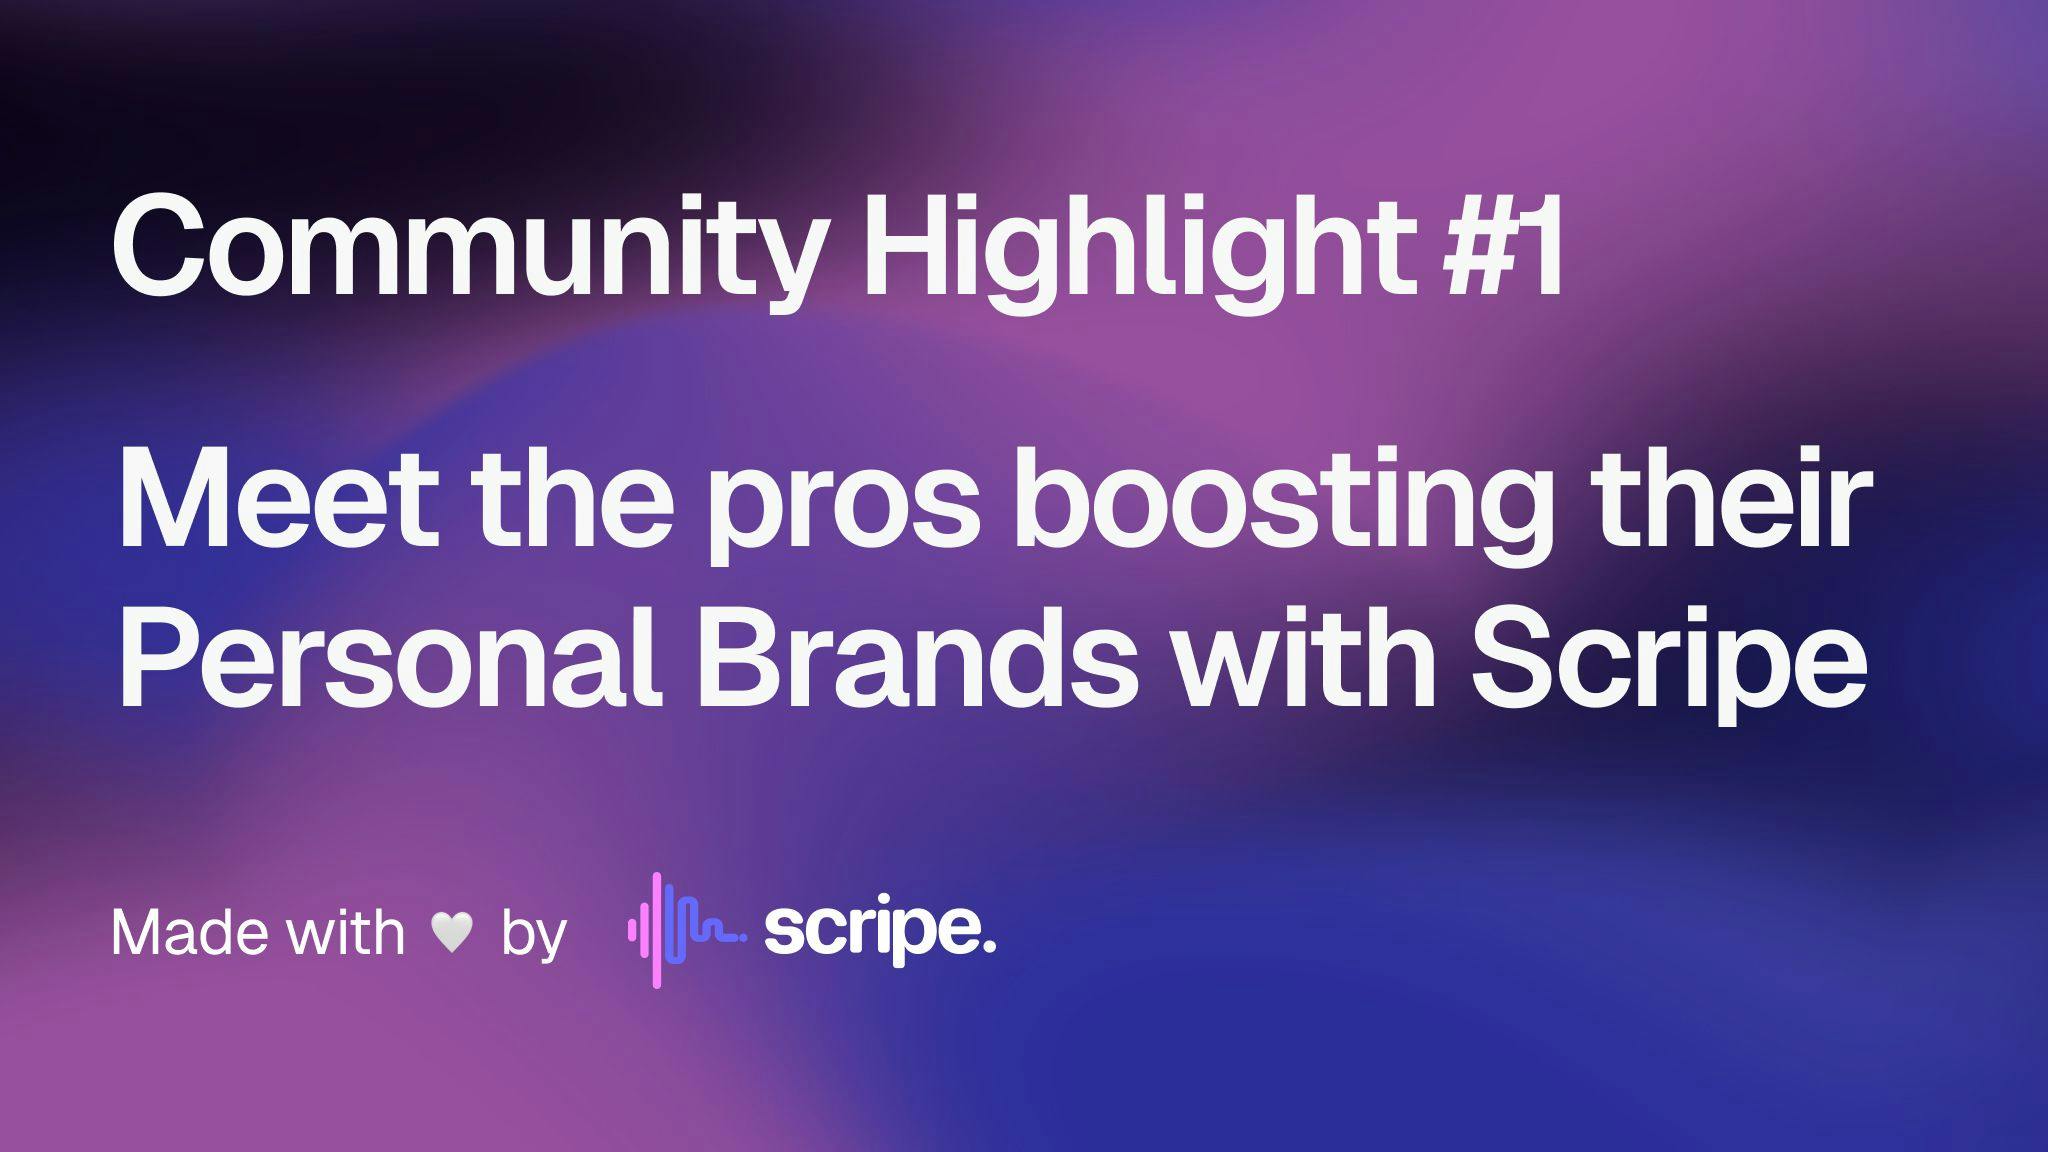 Community Highlight #1: Meet the Pros Boosting their Personal Brands with Scripe